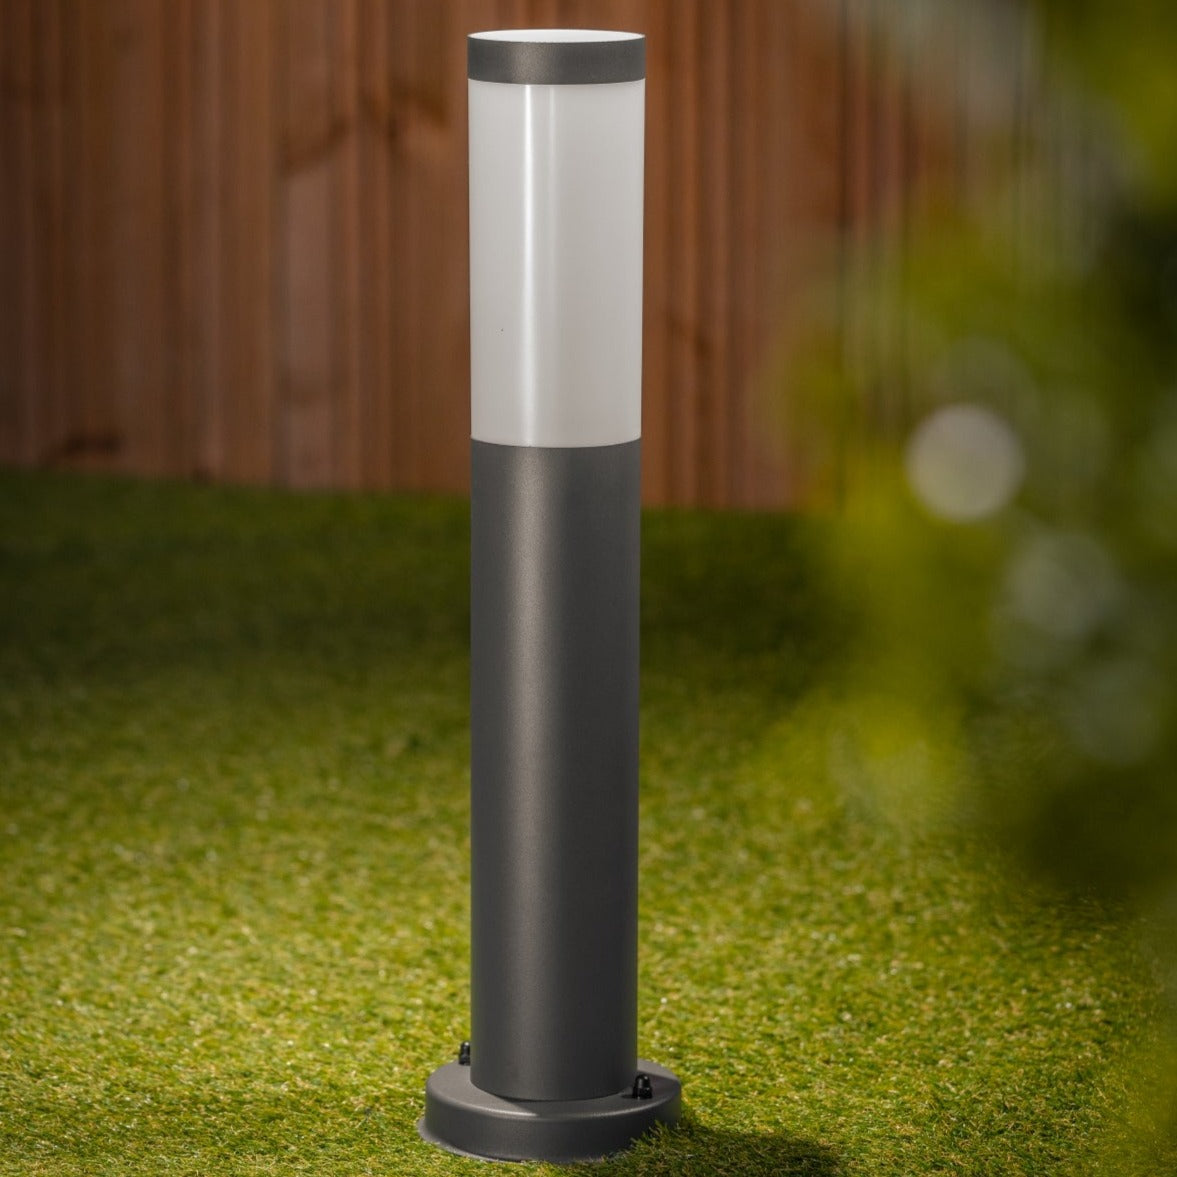 Our Rome dark anthracite grey outdoor post light would look perfect in a modern or more traditional home design. Outside post lights can provide atmospheric light in your garden, at the front door or on the terrace as well as a great security solution. It is designed for durability and longevity with its robust material producing a fully weatherproof and water resistant light fitting.